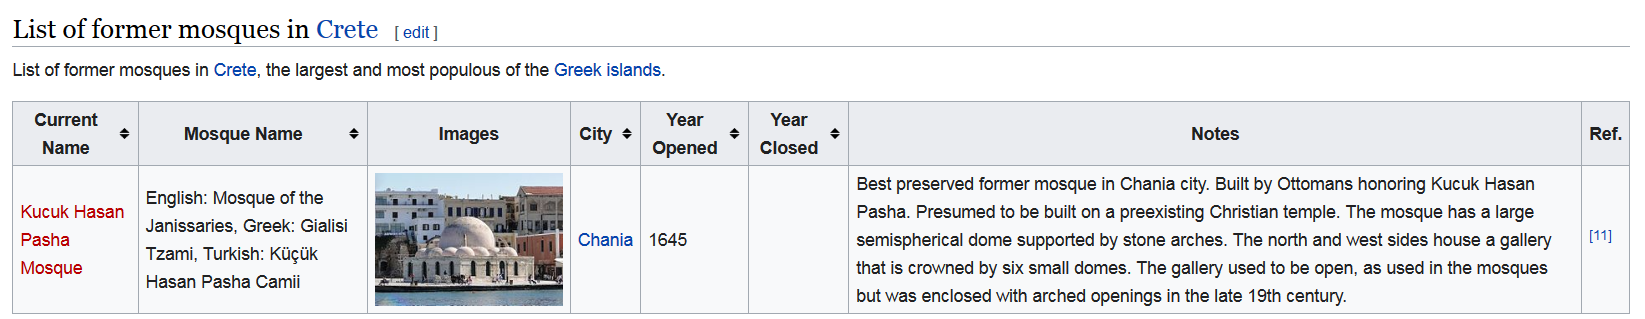 Screenshot_2022-04-06 List of former mosques in Greece - Wikipedia(3).png